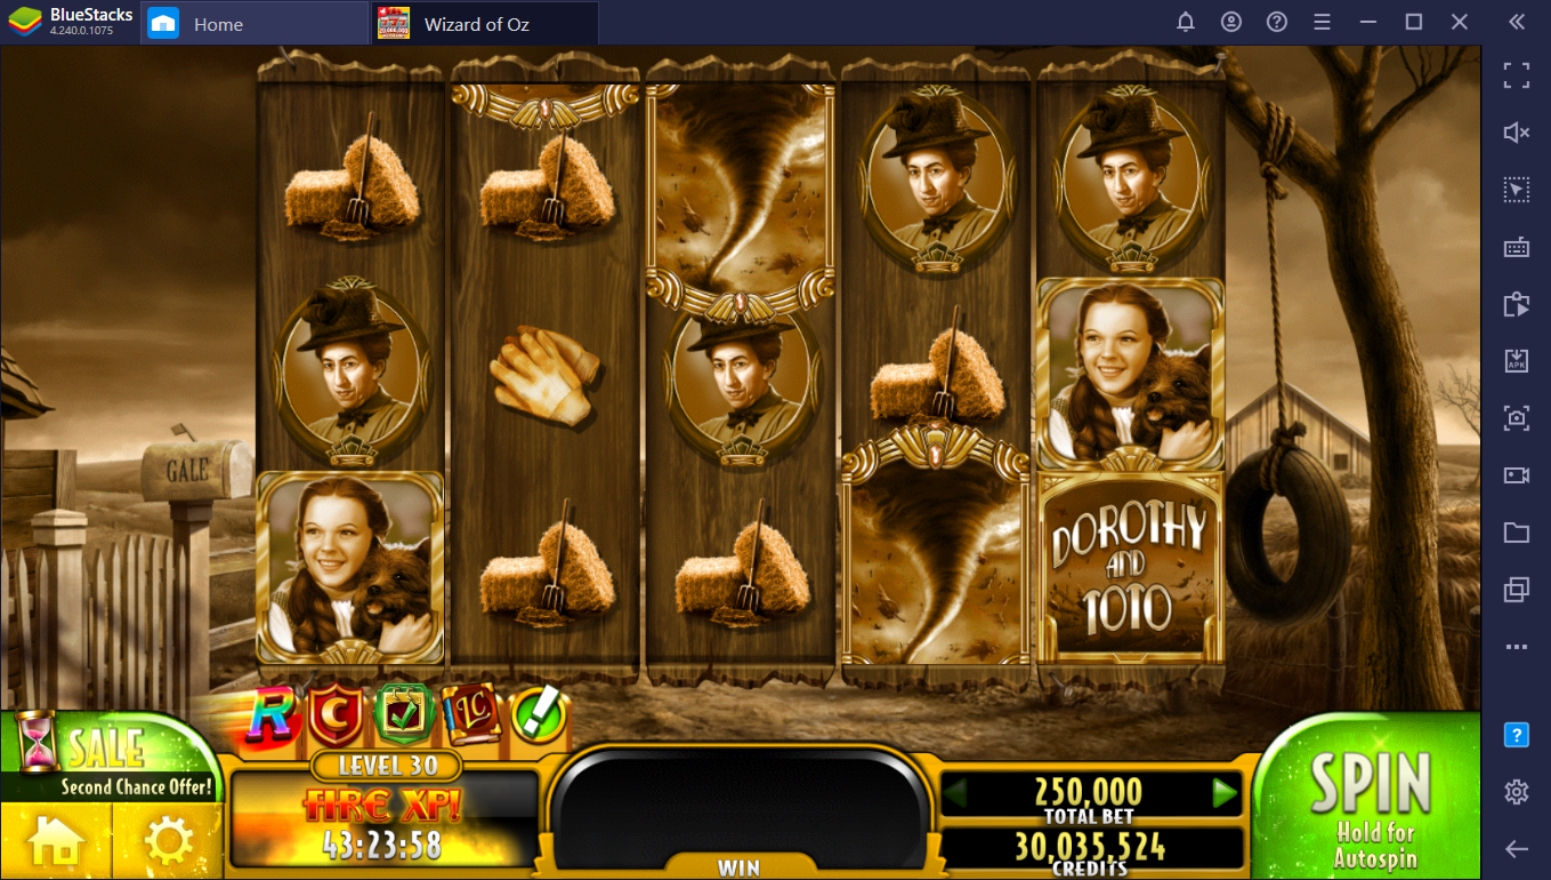 Beginner's Guide to Playing Wizard of Oz Casino on PC